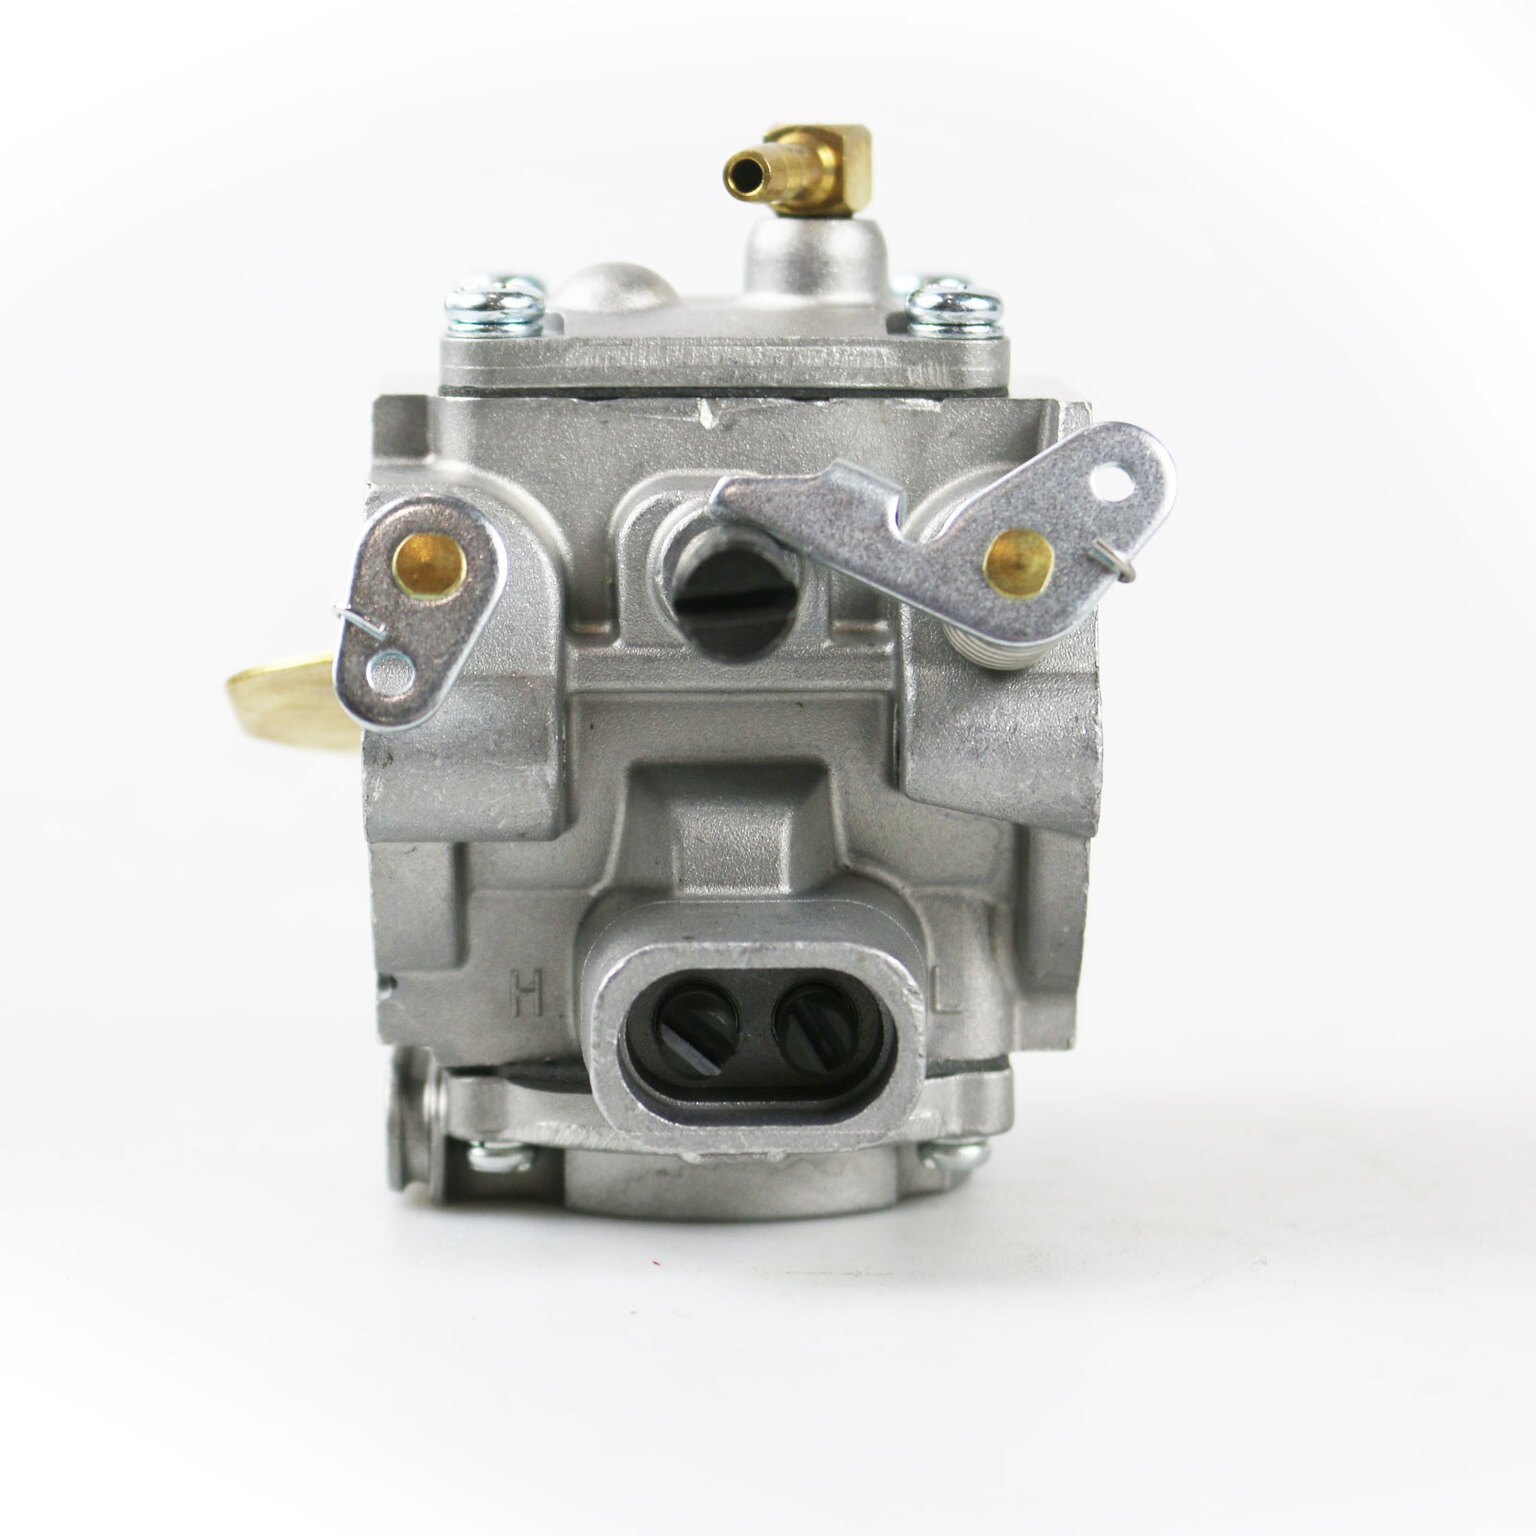 Carburettor Carby Carb HT-12E For Stihl 088 MS880 Chainsaw 1124 120 0609